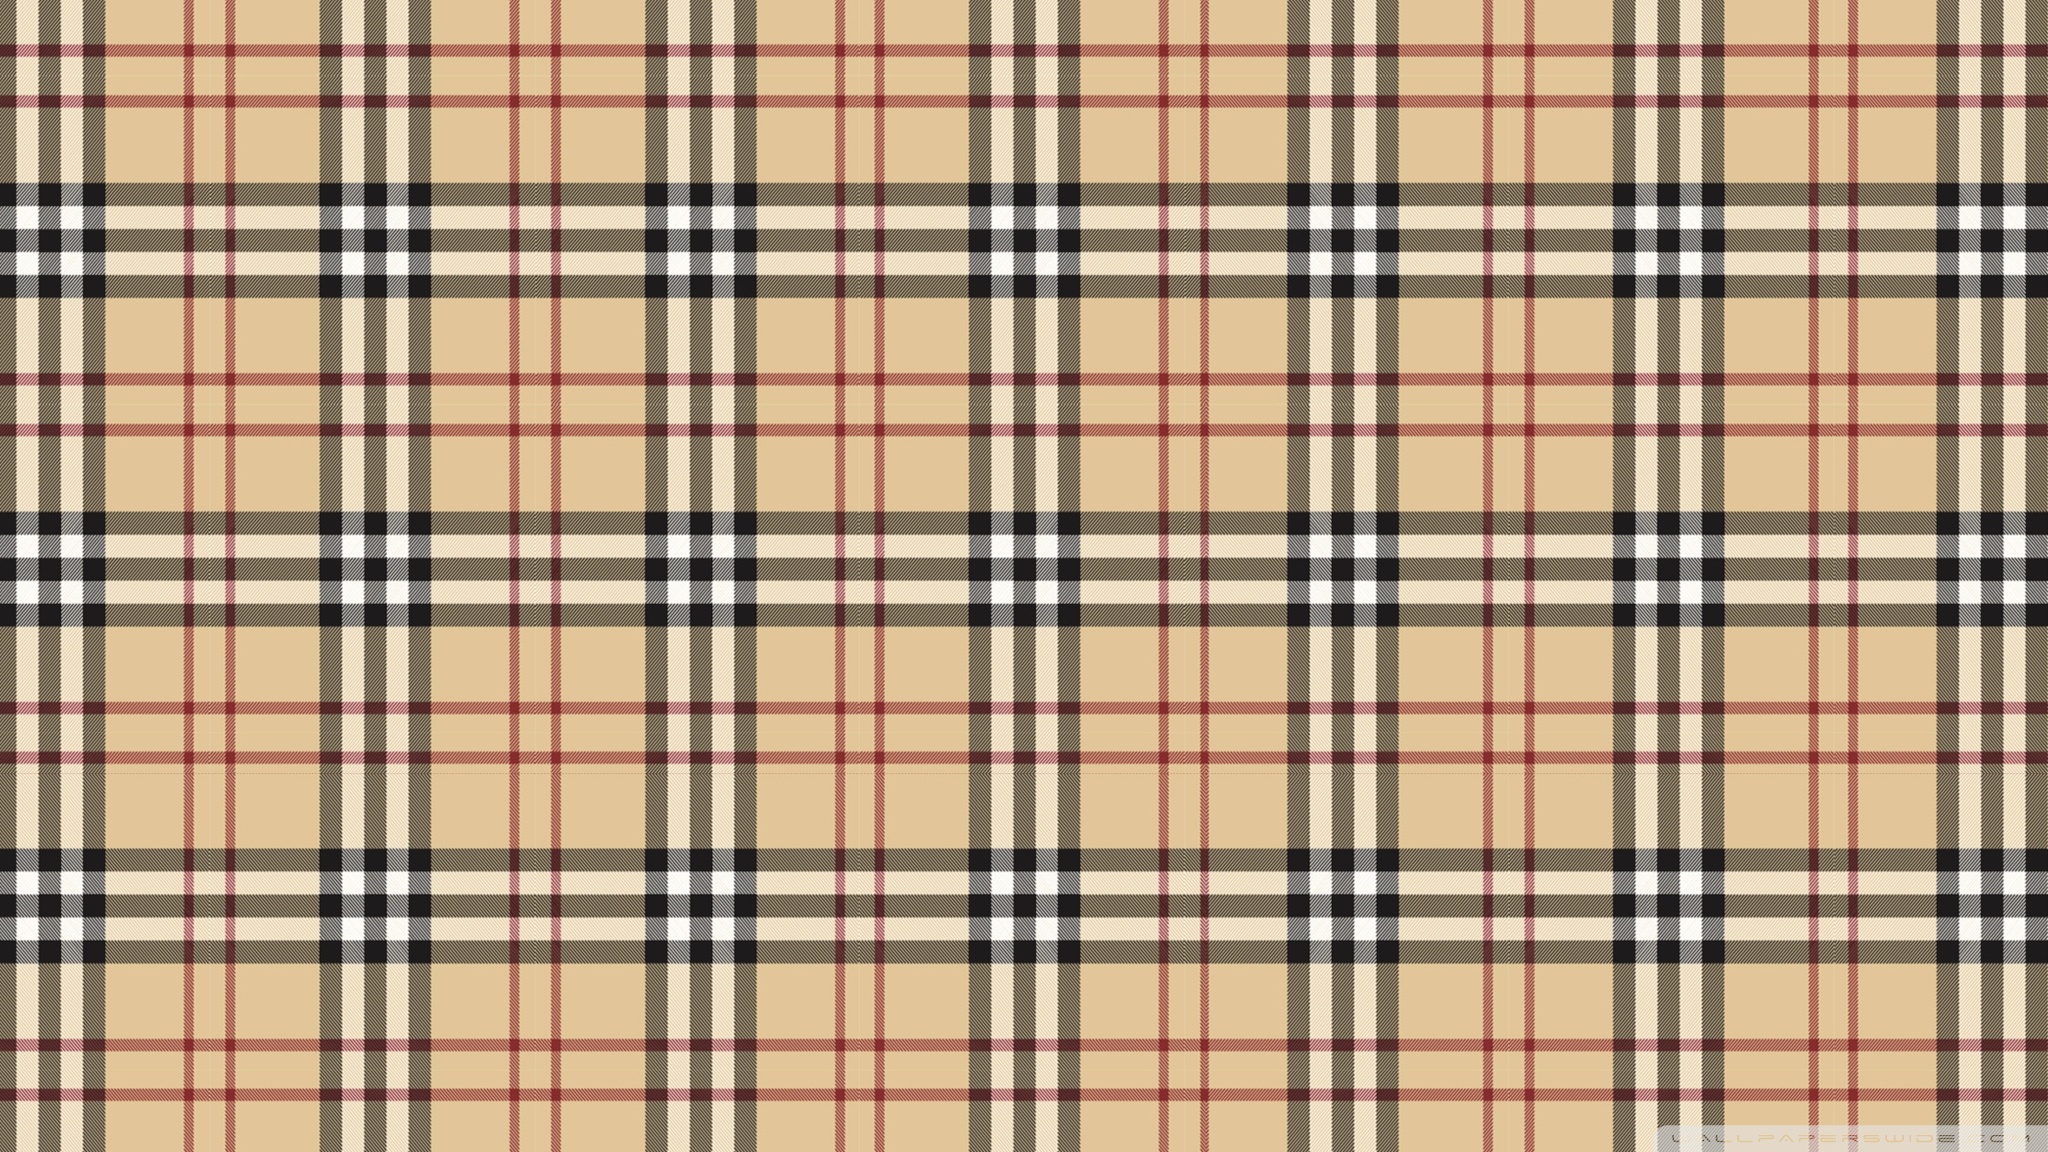 Burberry Wallpaper Vector Cheap Sale, UP TO 64% OFF |  www.istruzionepotenza.it